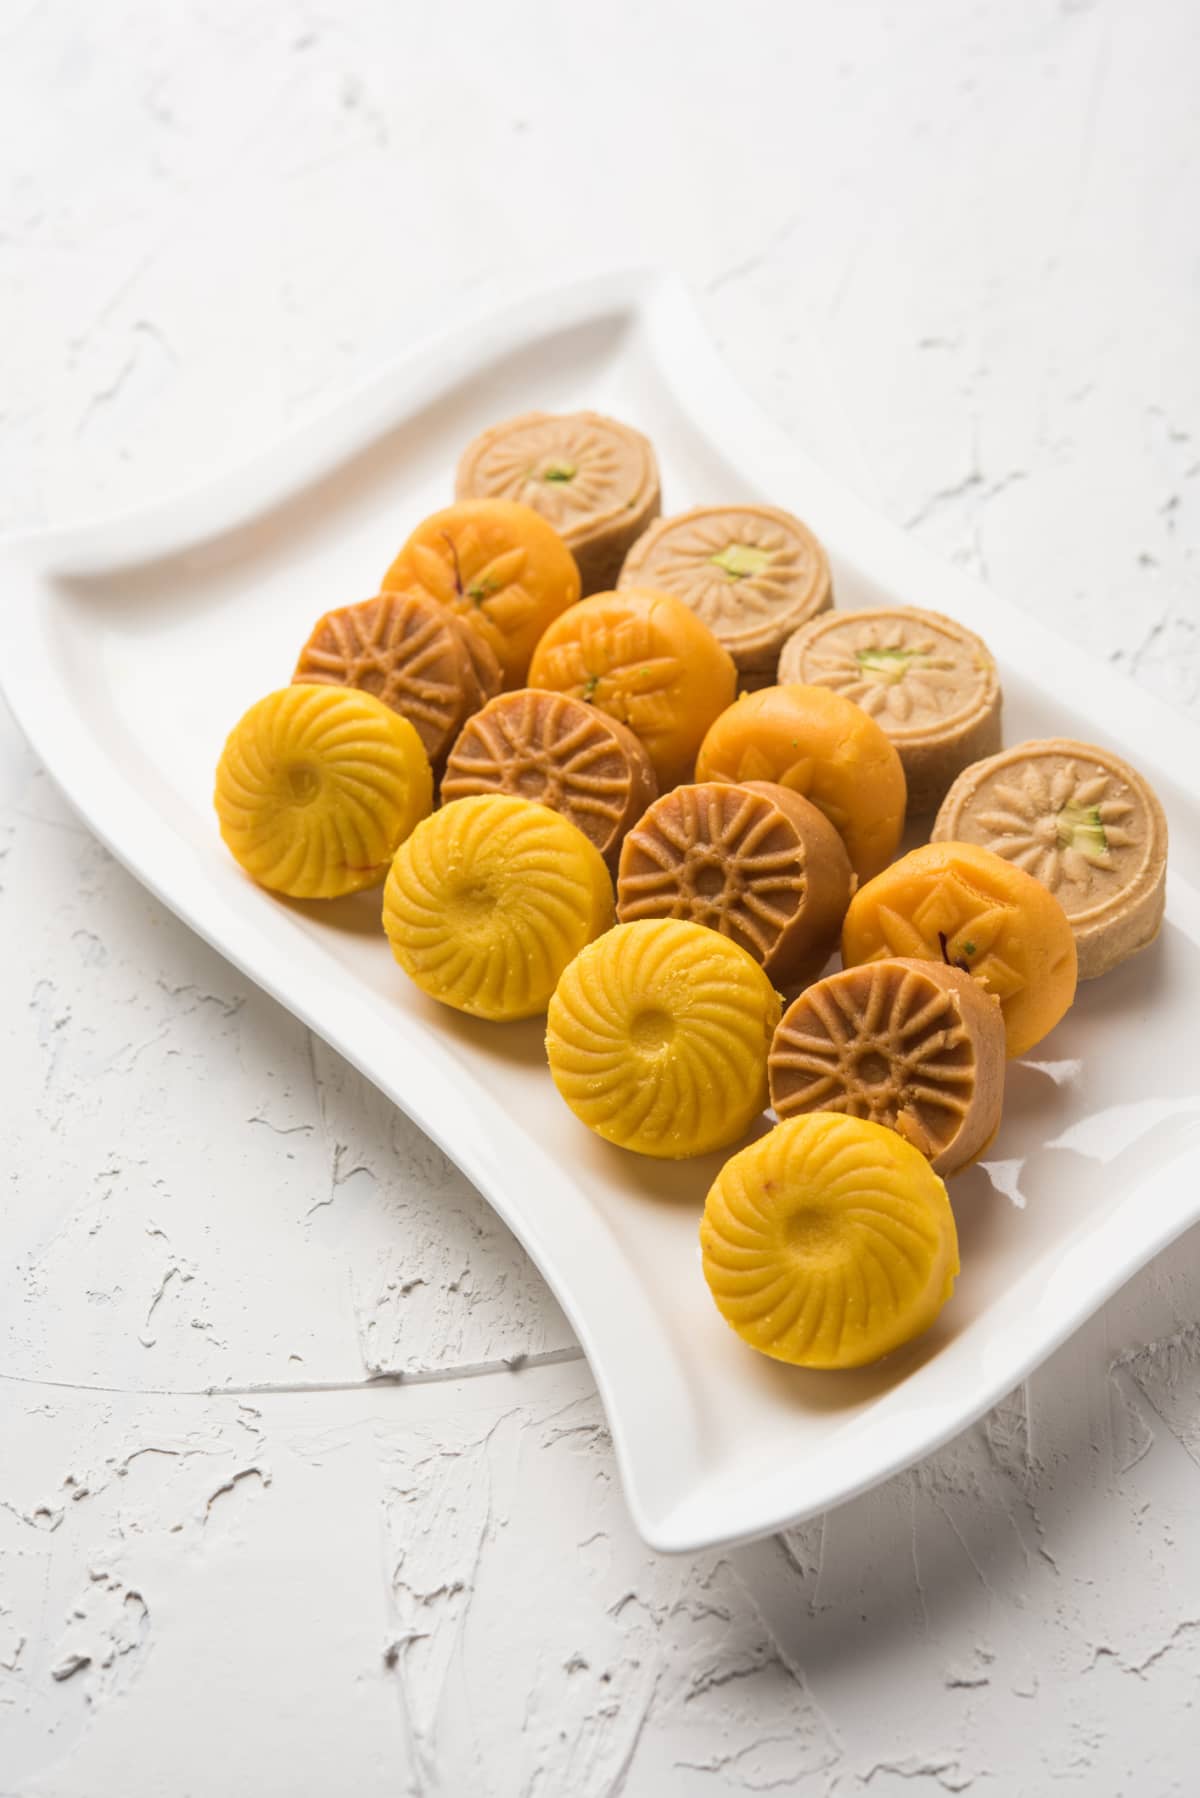 Variety of Peda / Pedha Served in a bowl or plate over white background or with pile of gifts. It's a popular festival food from India. selective focus